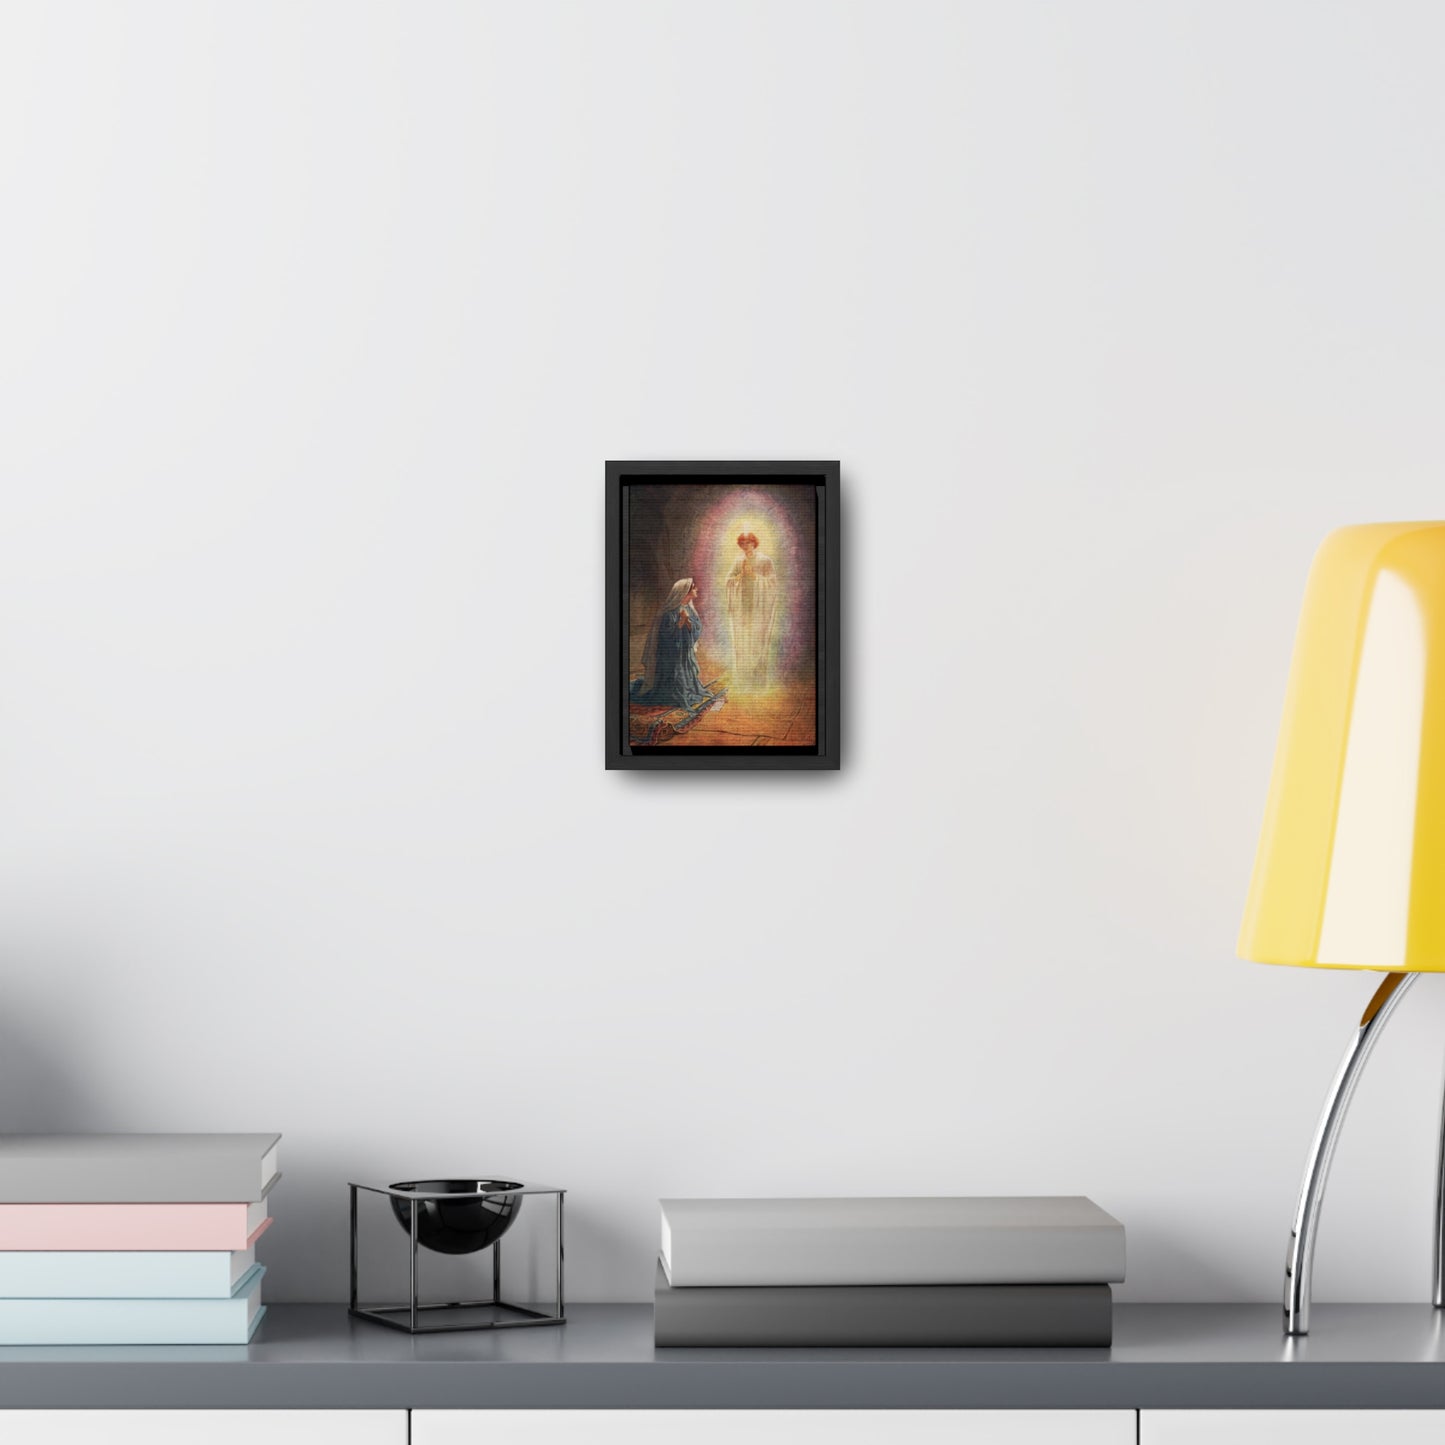 Annunciation Framed, Gallery Wrapped Canvas - 5"x7" - Studio Lams Creative Collective